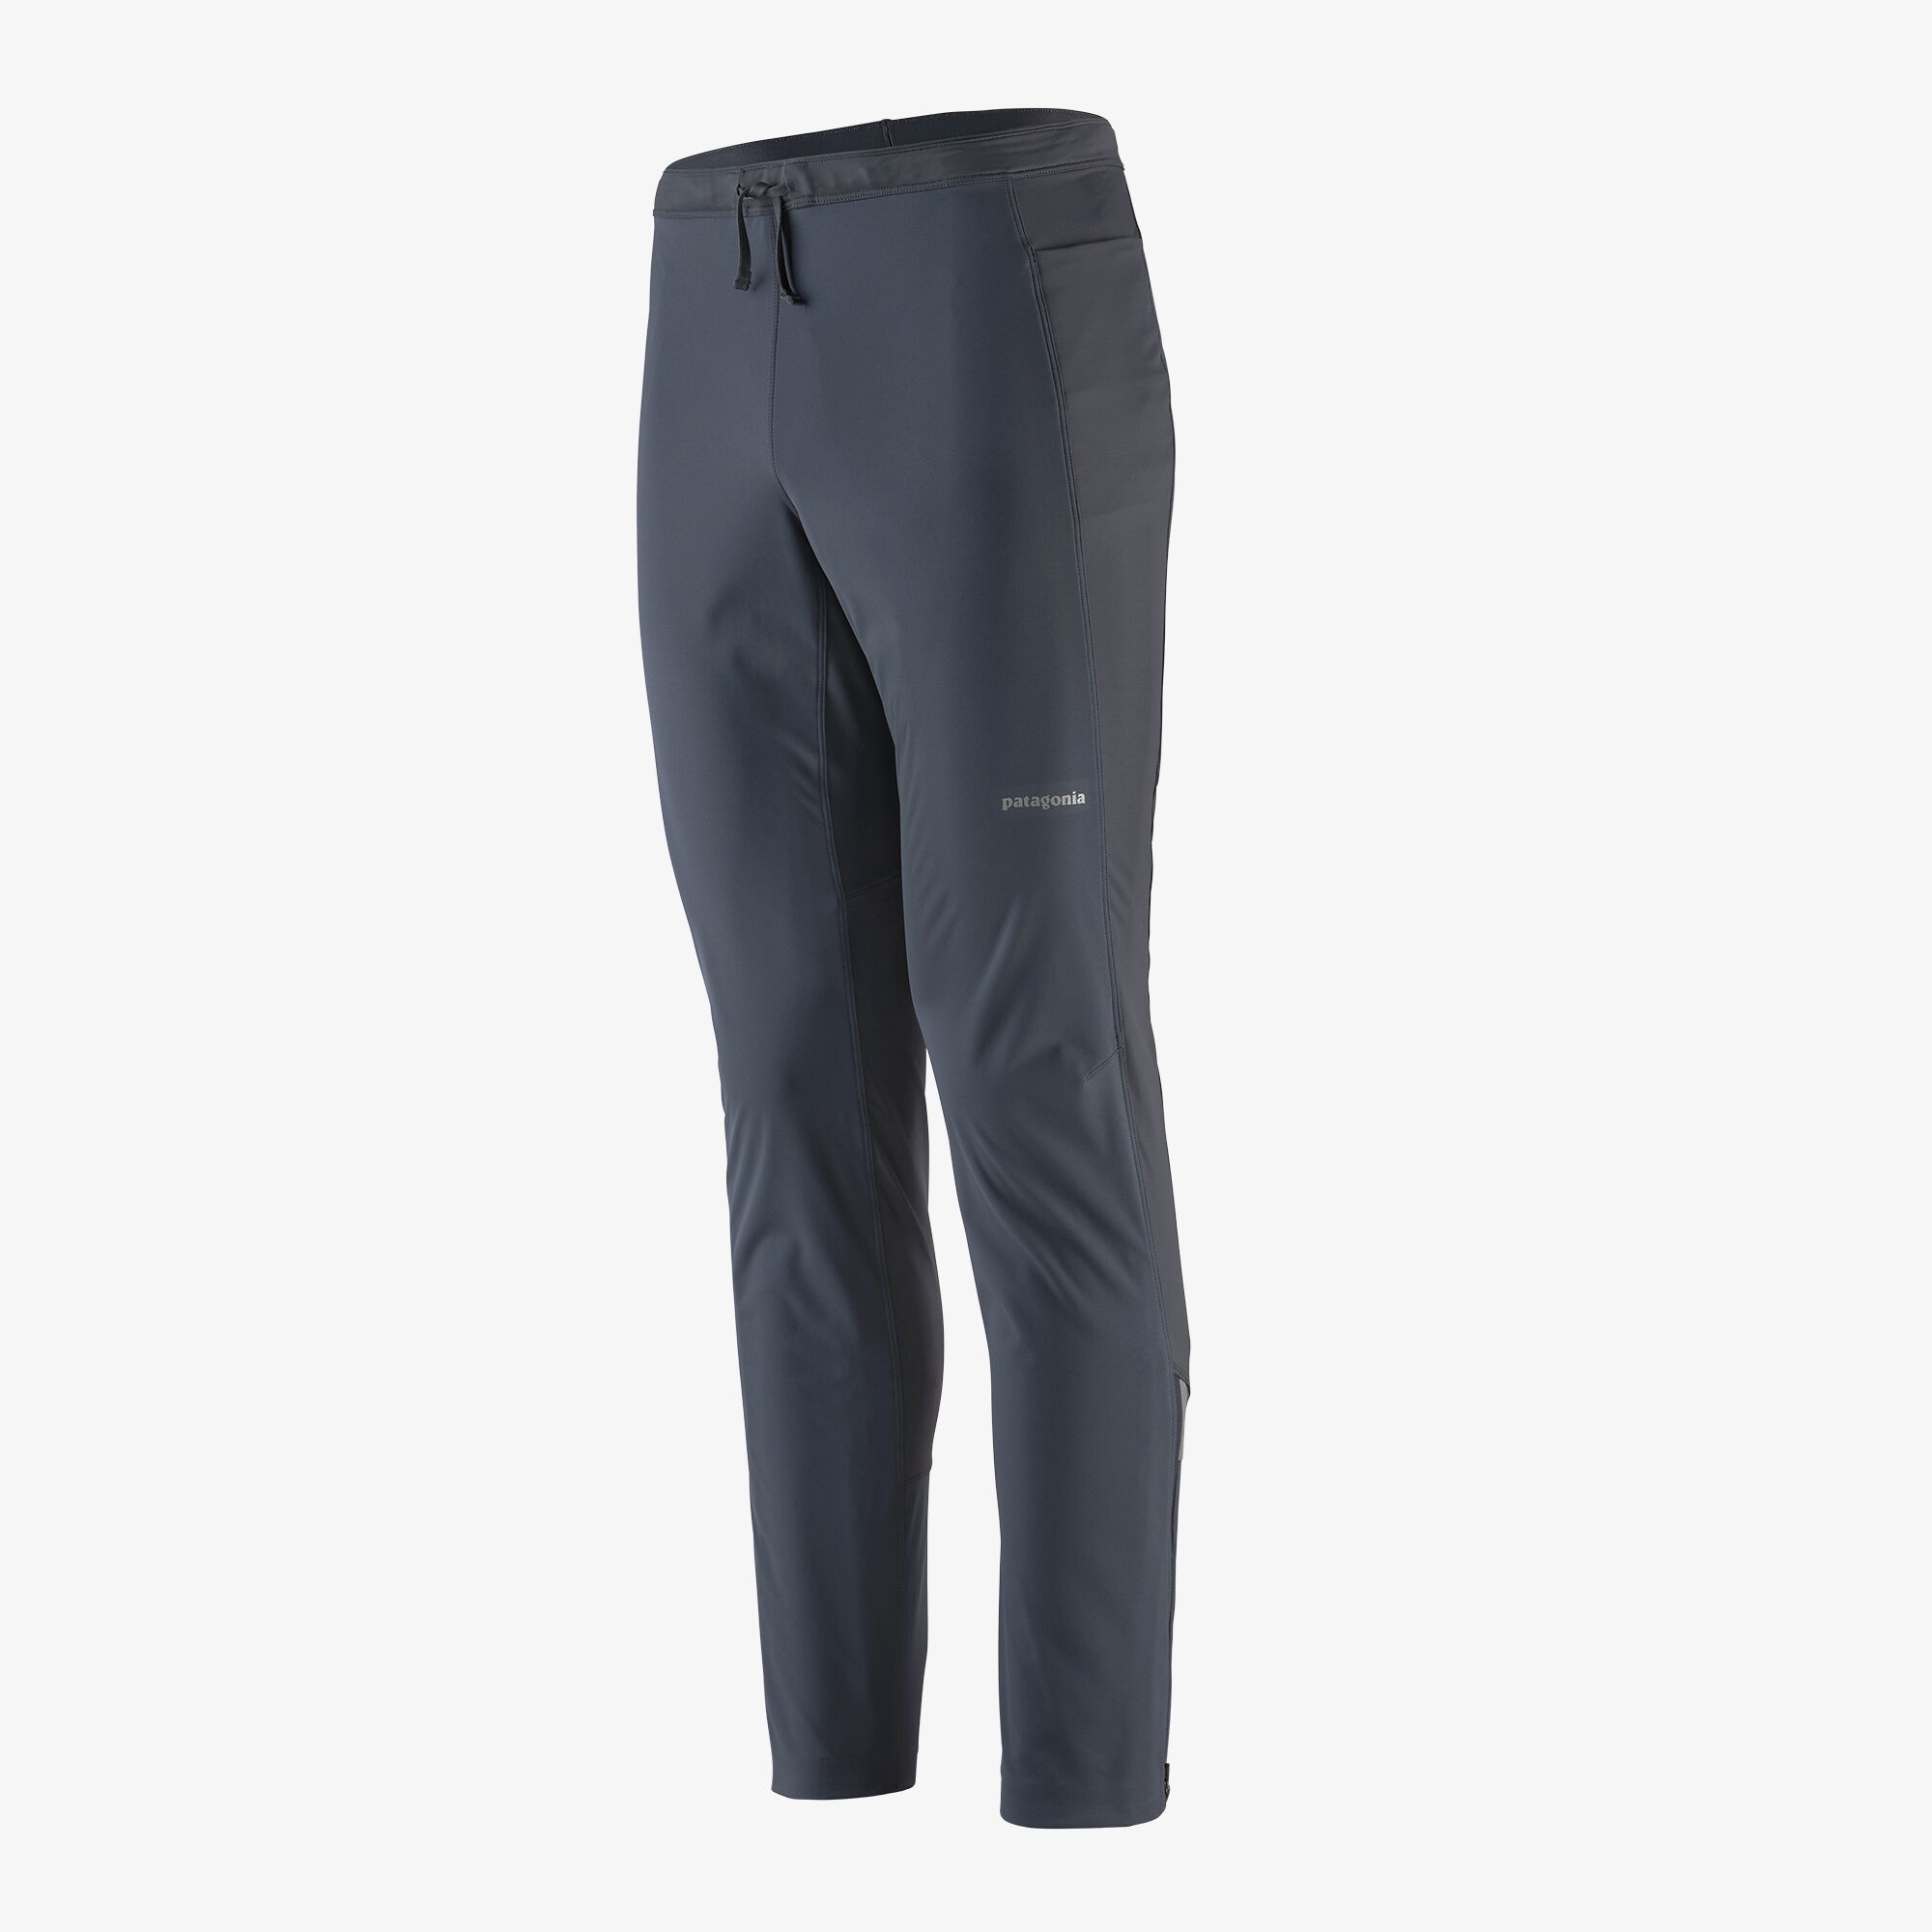 M's Wind Shield Pants - The Guides Hut